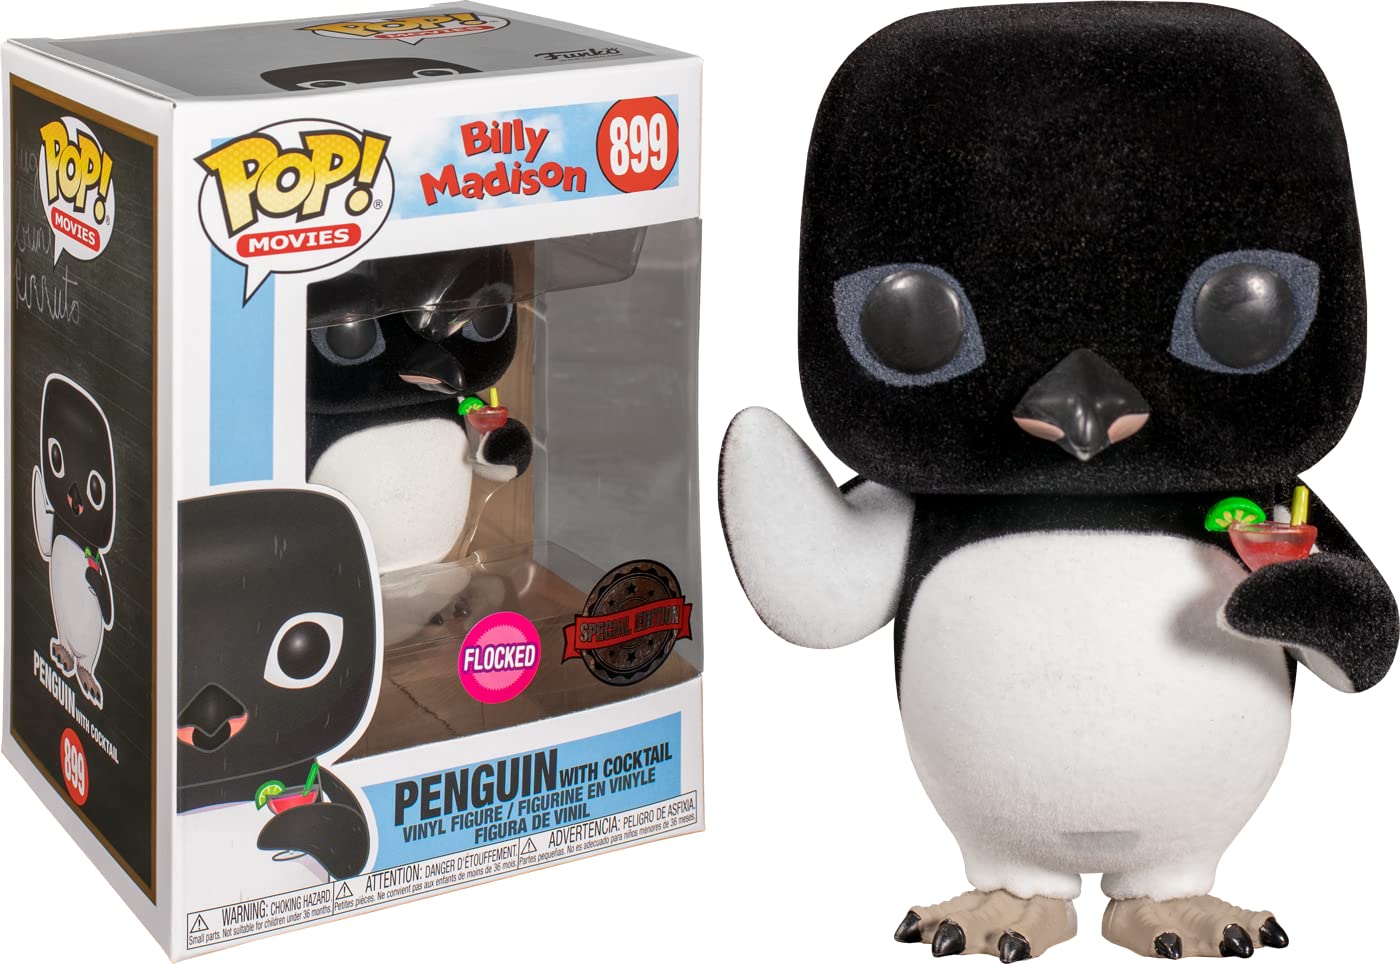 Funko POP! Movies: Billy Madison Penguin [with Cocktail Flocked] # 899 Exclusive